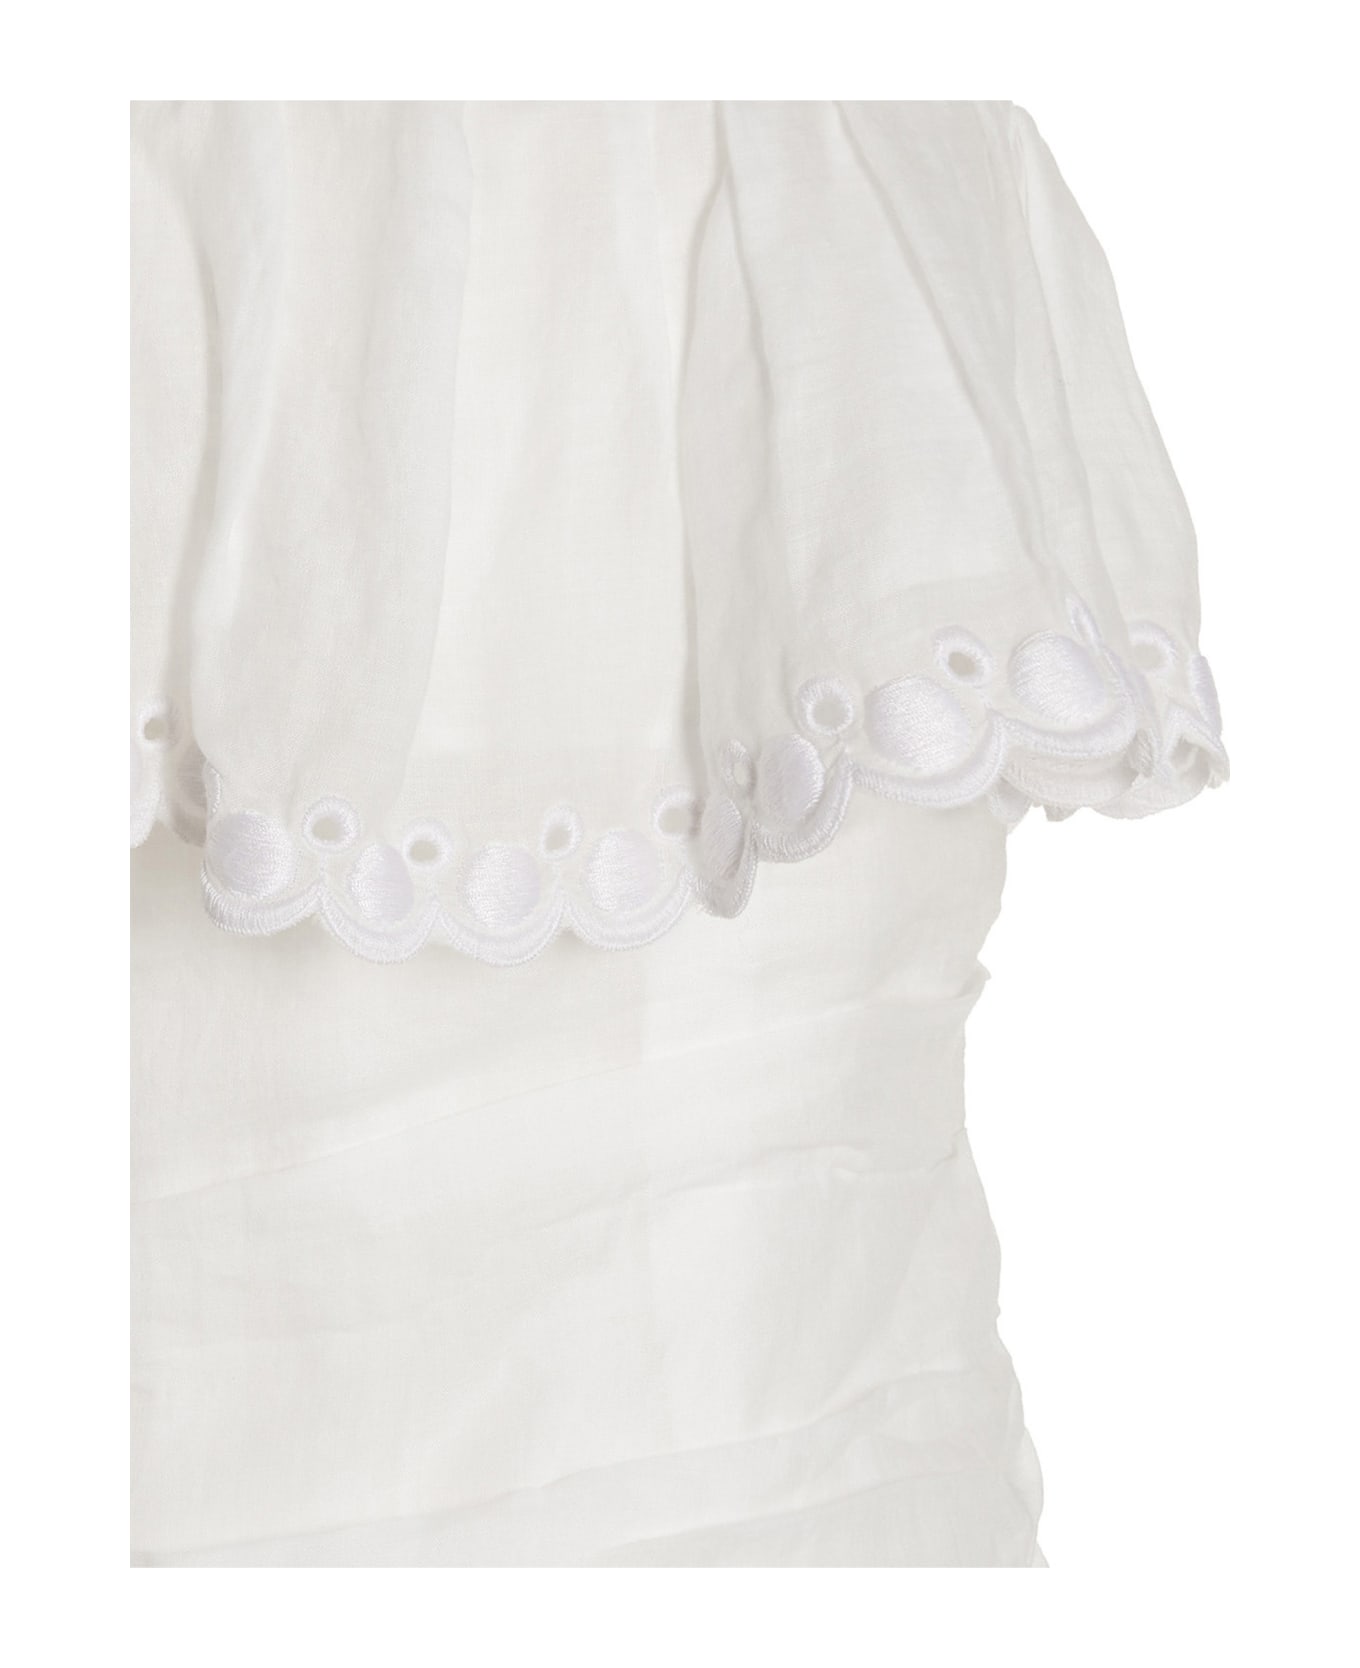 Isabel Marant 'orma' Top - White